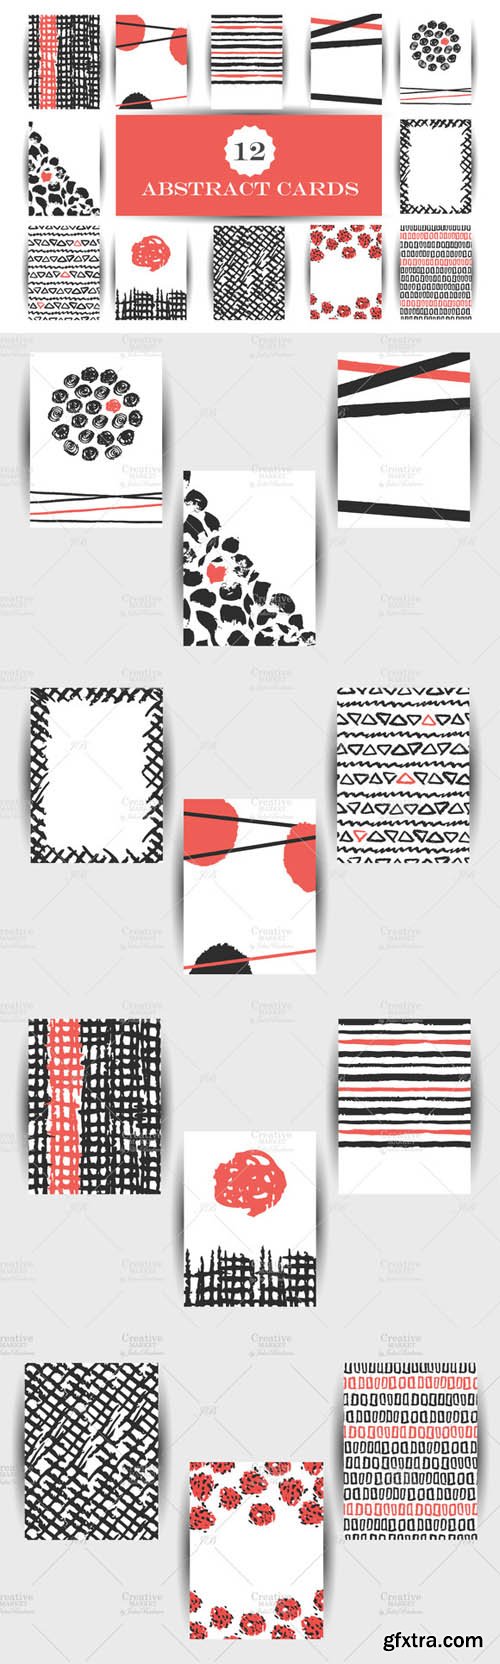 CM - Hand drawn abstract cards 434617